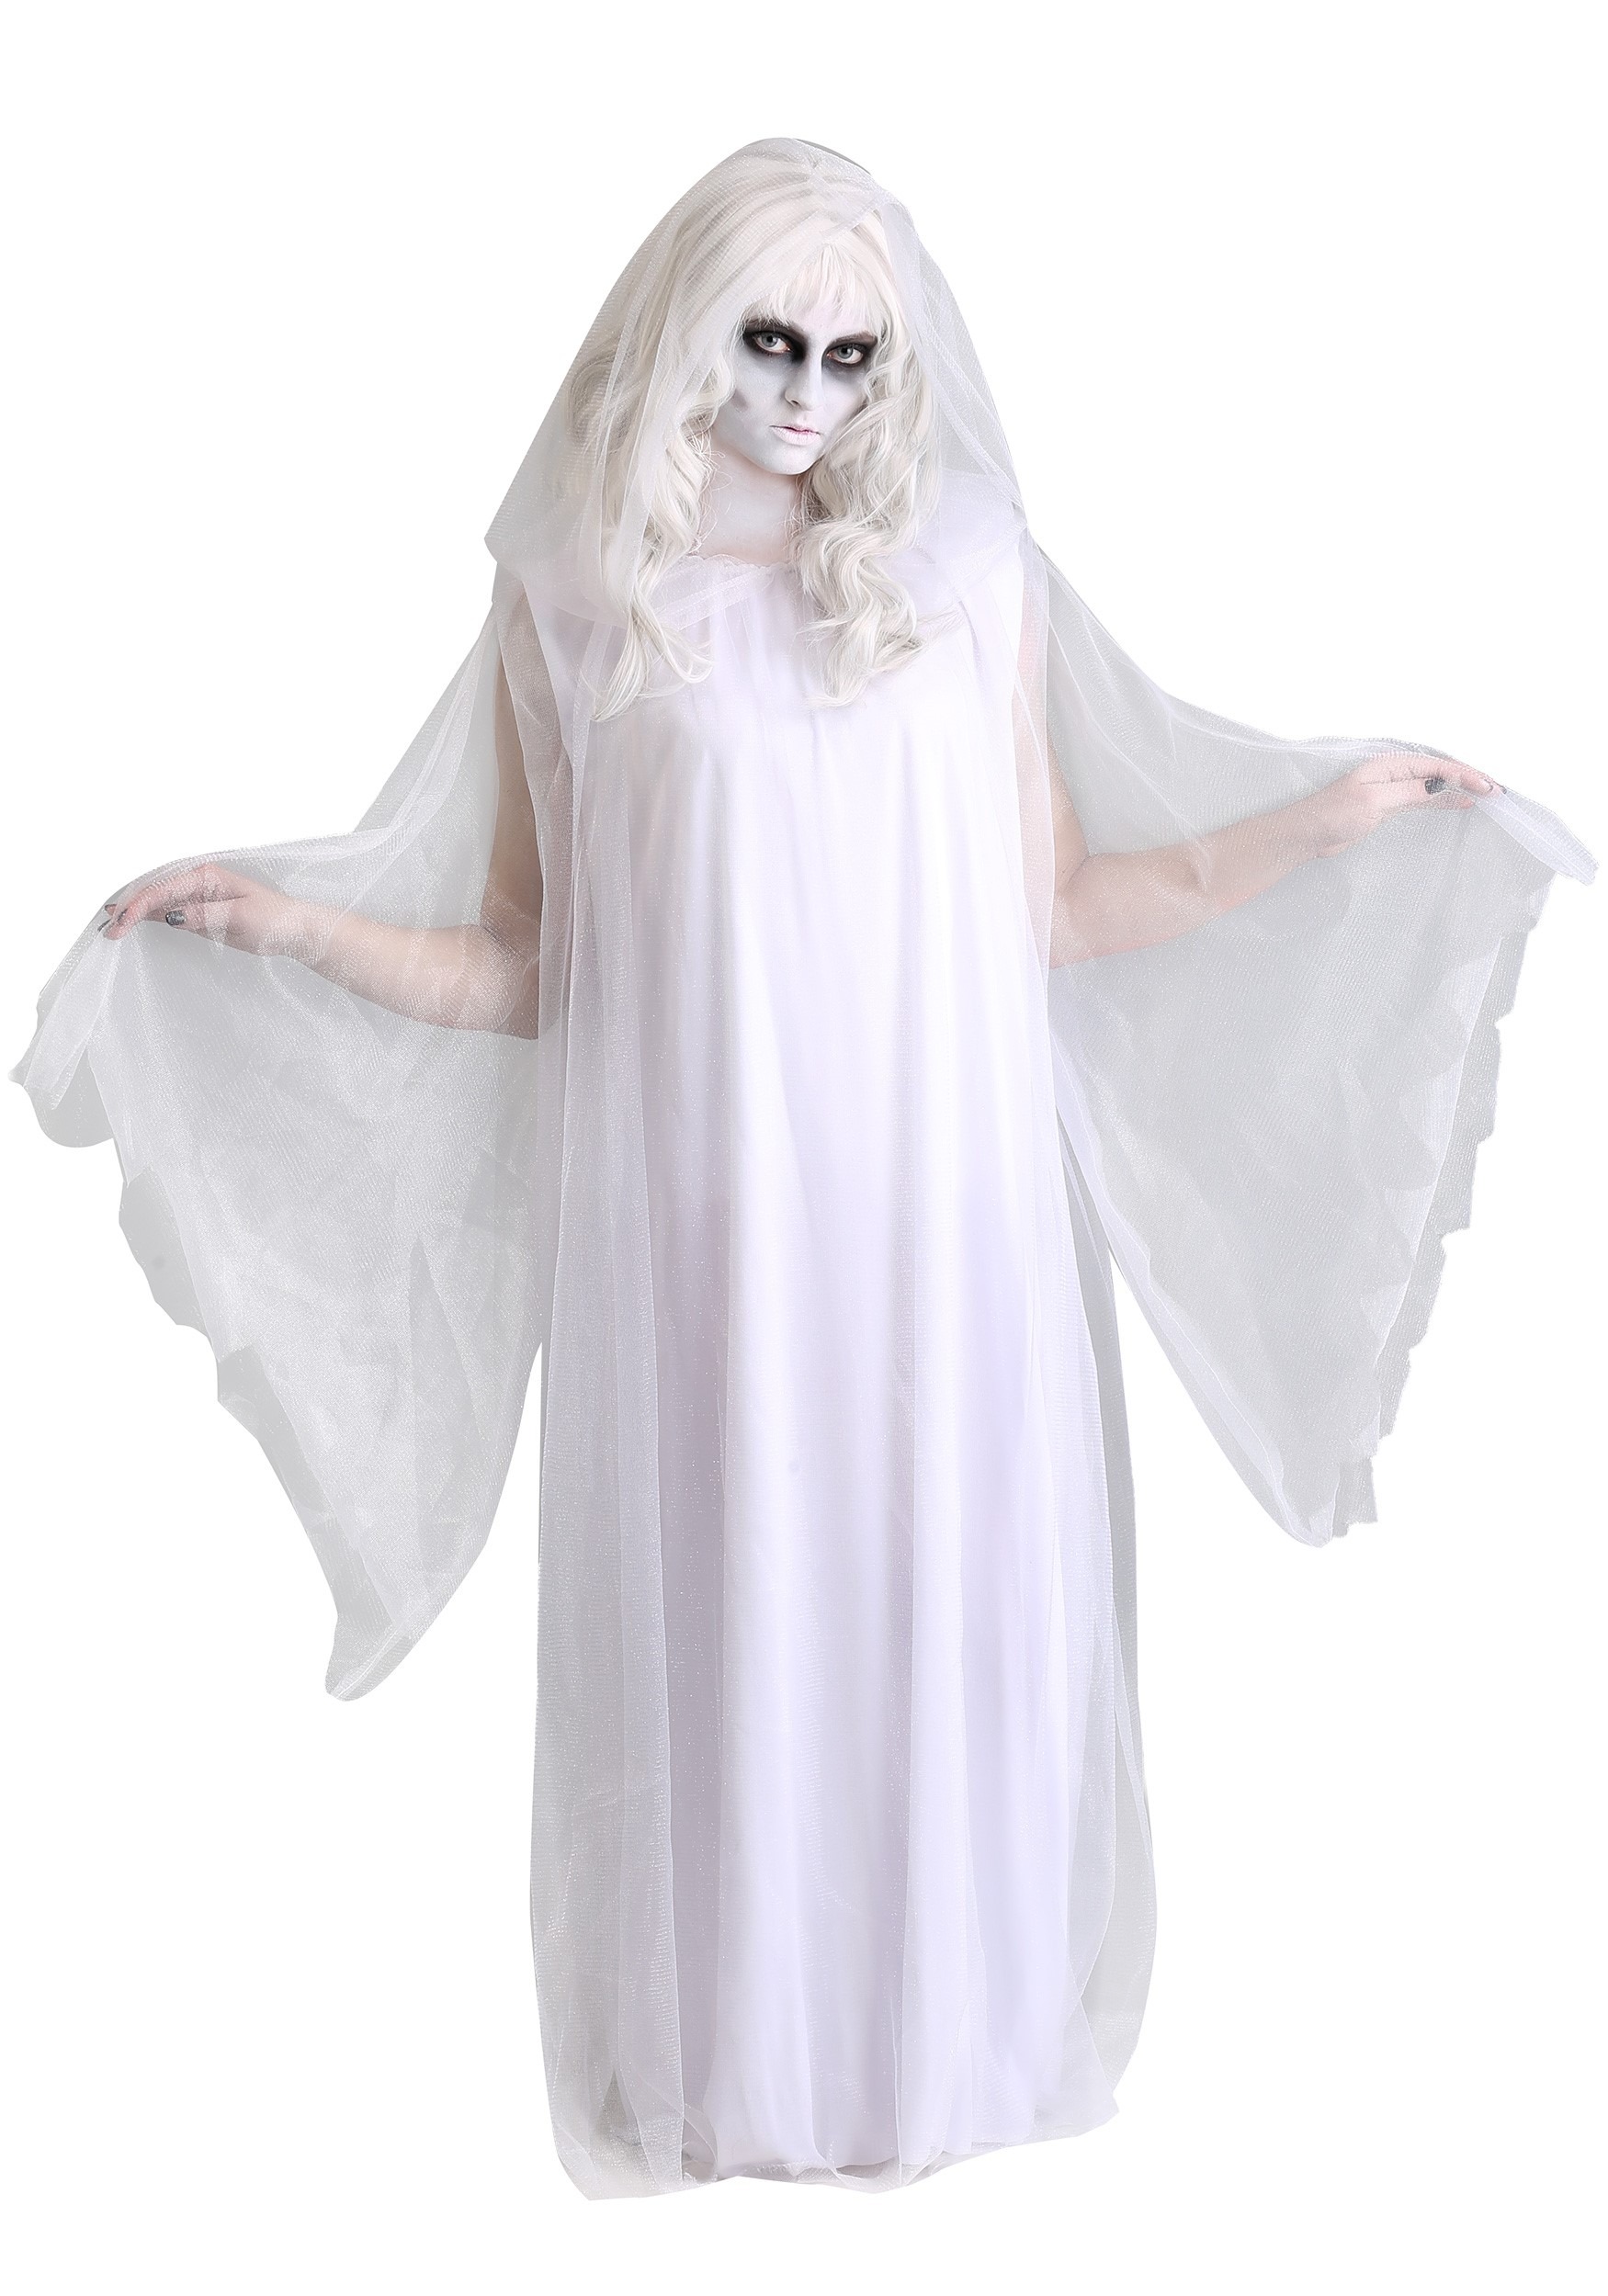 Ghost Costumes For Adults Ubicaciondepersonas Cdmx Gob Mx